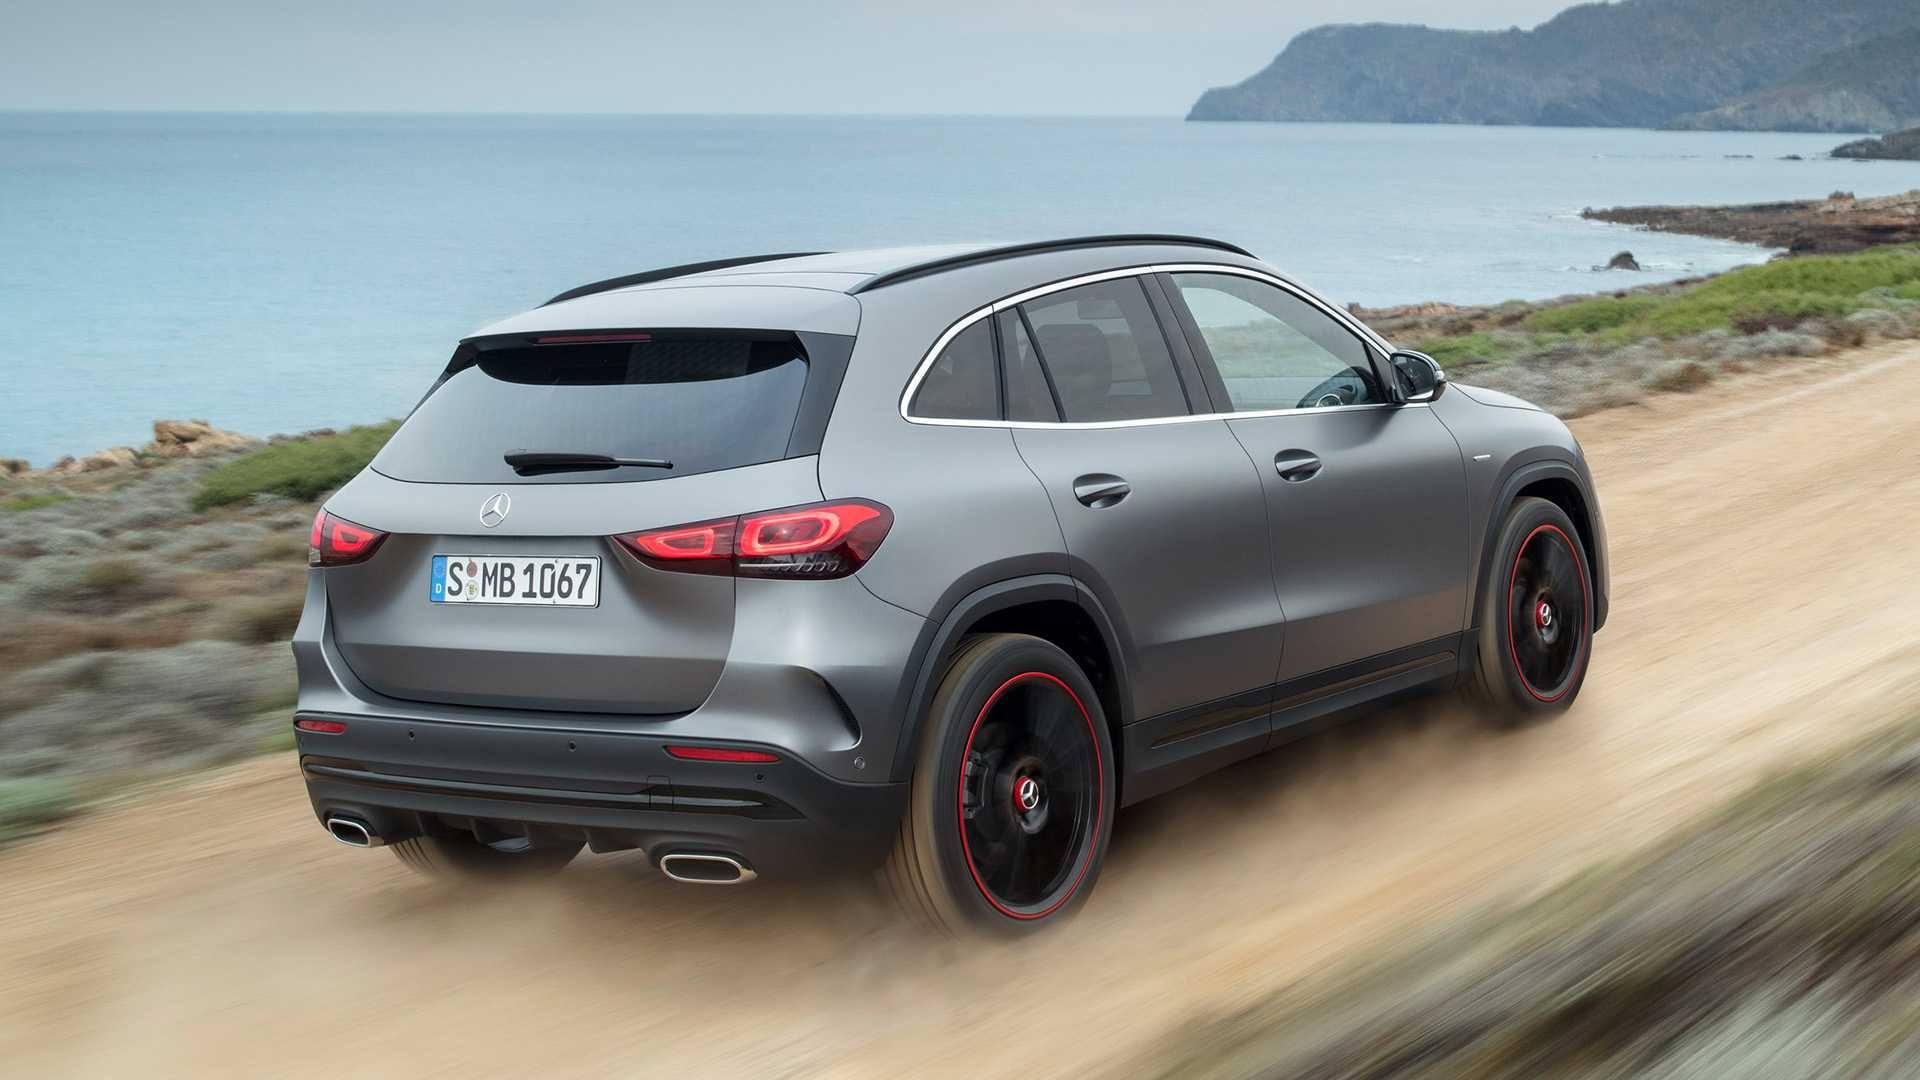 Mercedes-Benz GLA, New model, All about engines, Preise, 1920x1080 Full HD Desktop